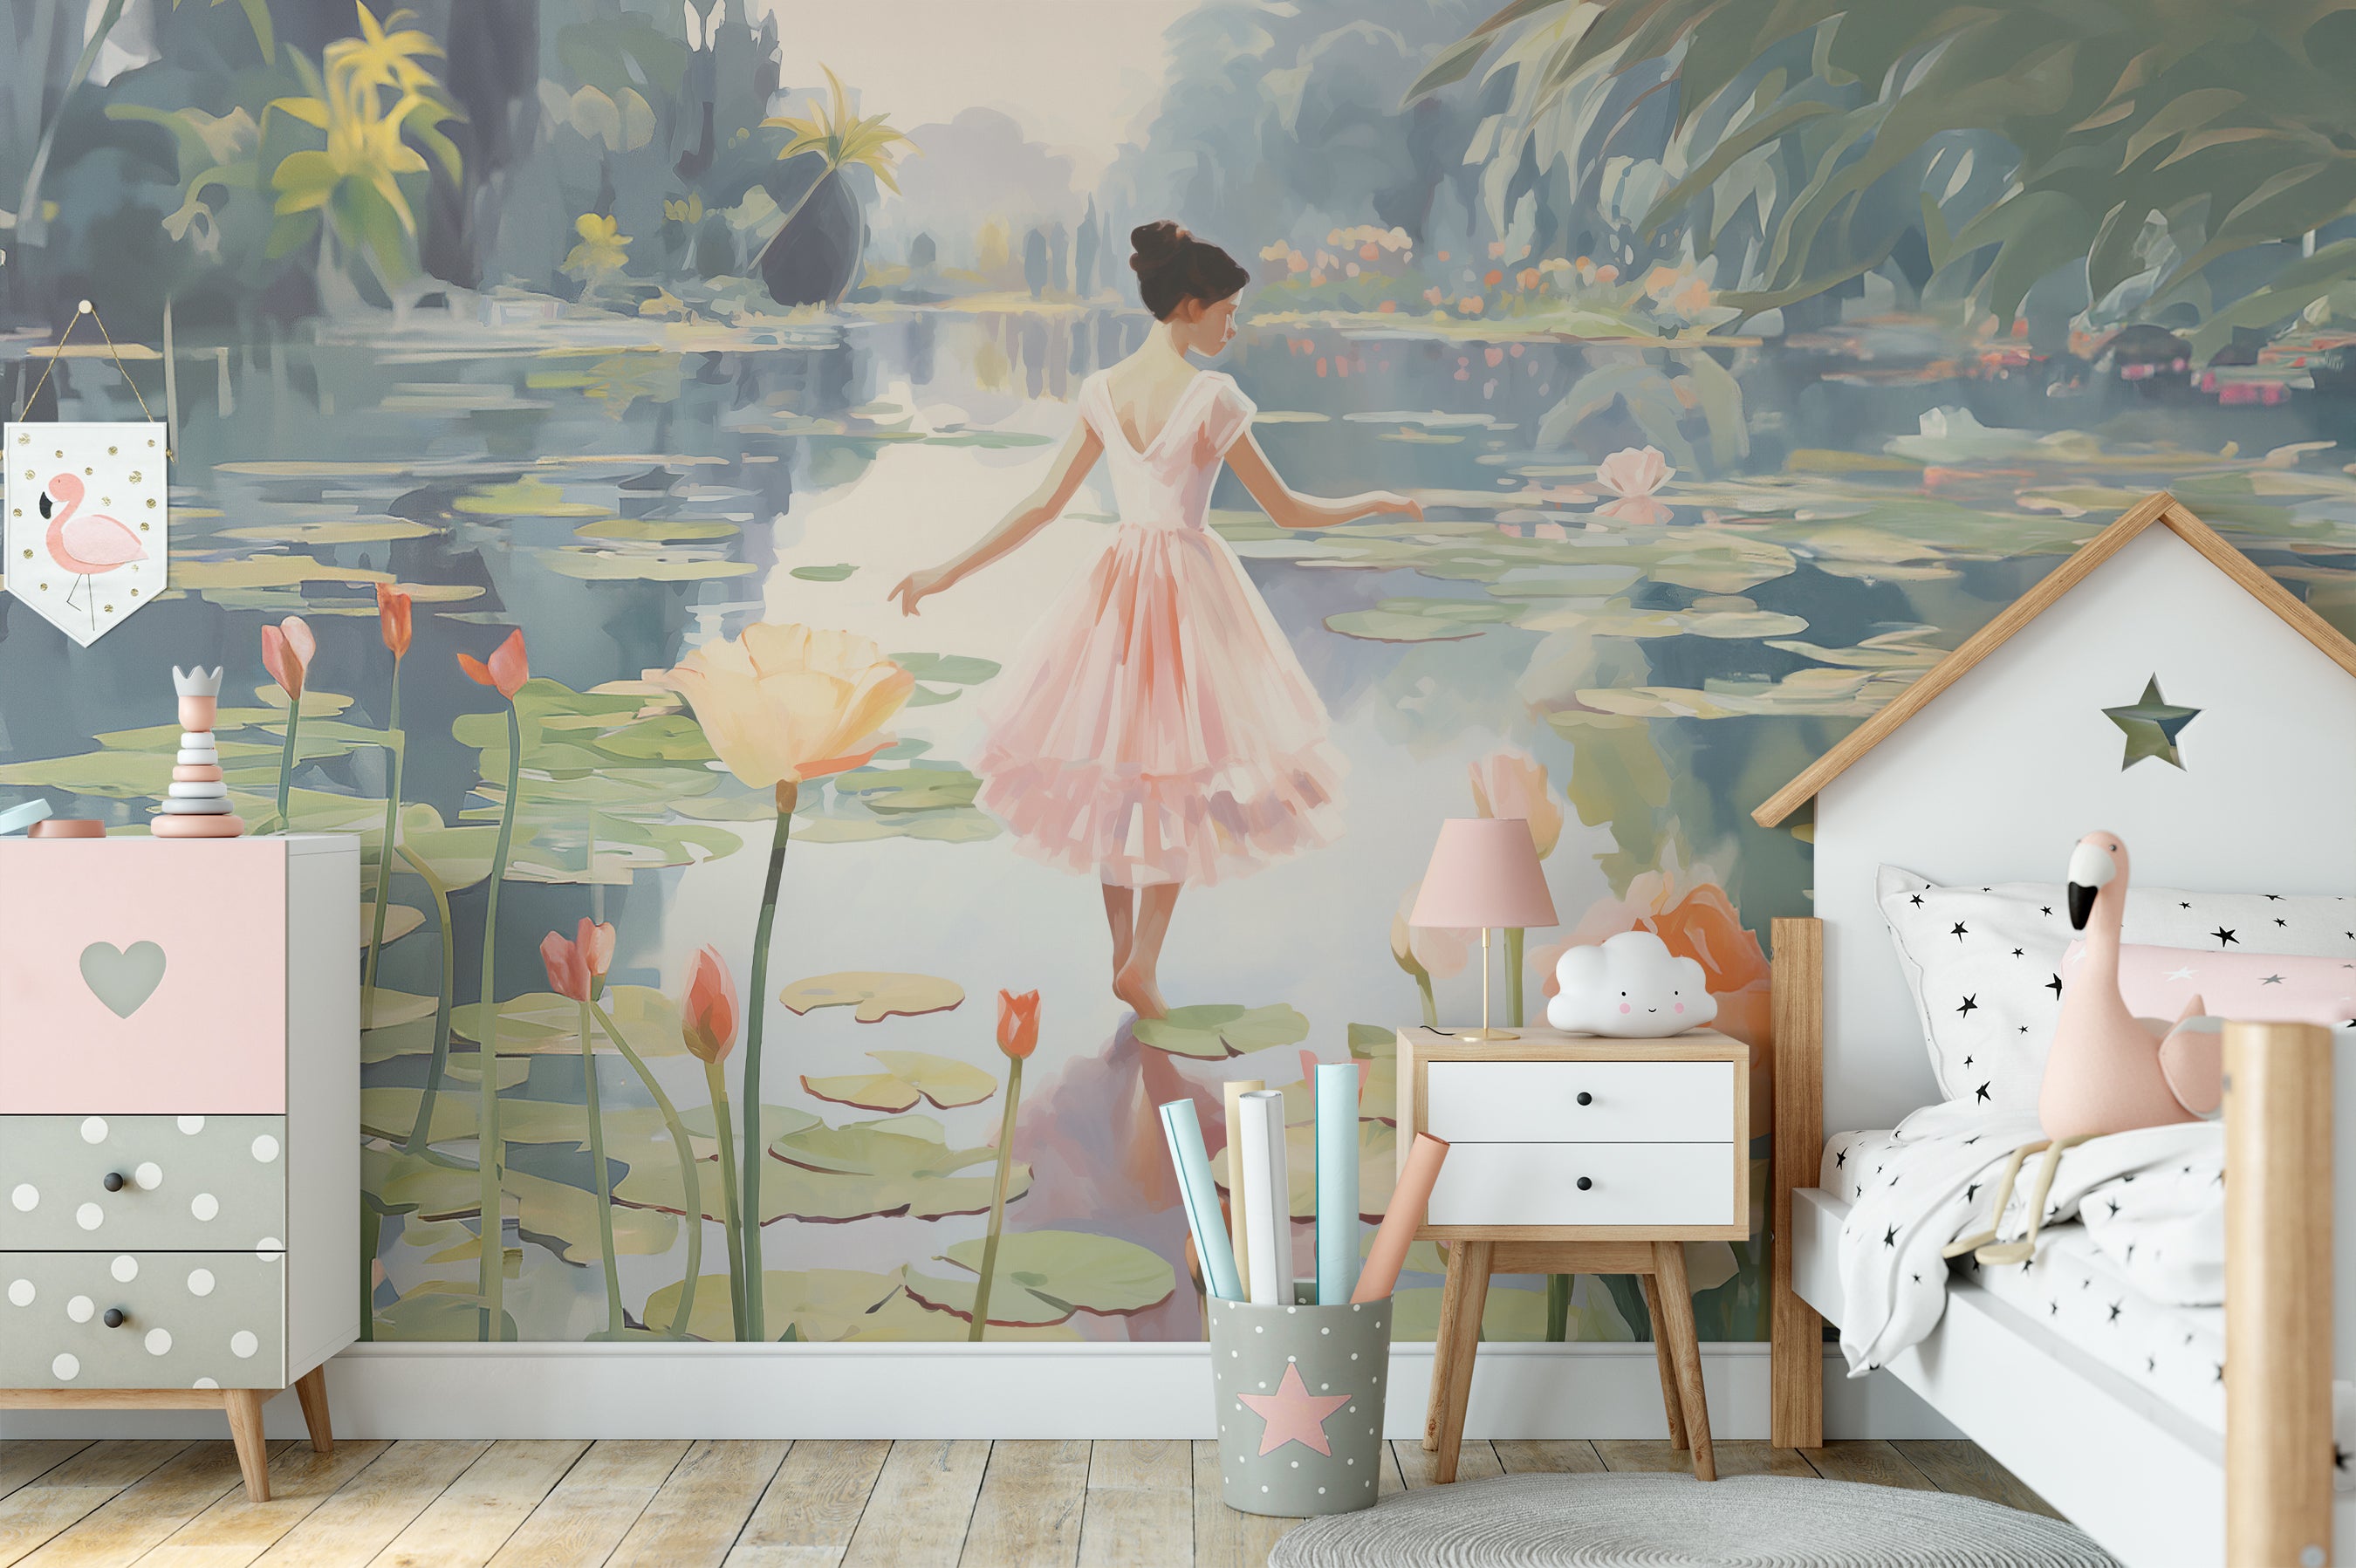 Mockup of a nursery room featuring the Dancing Lily Mural on the wall, with a young girl in a pink dress among flowers, complemented by child-friendly room decor